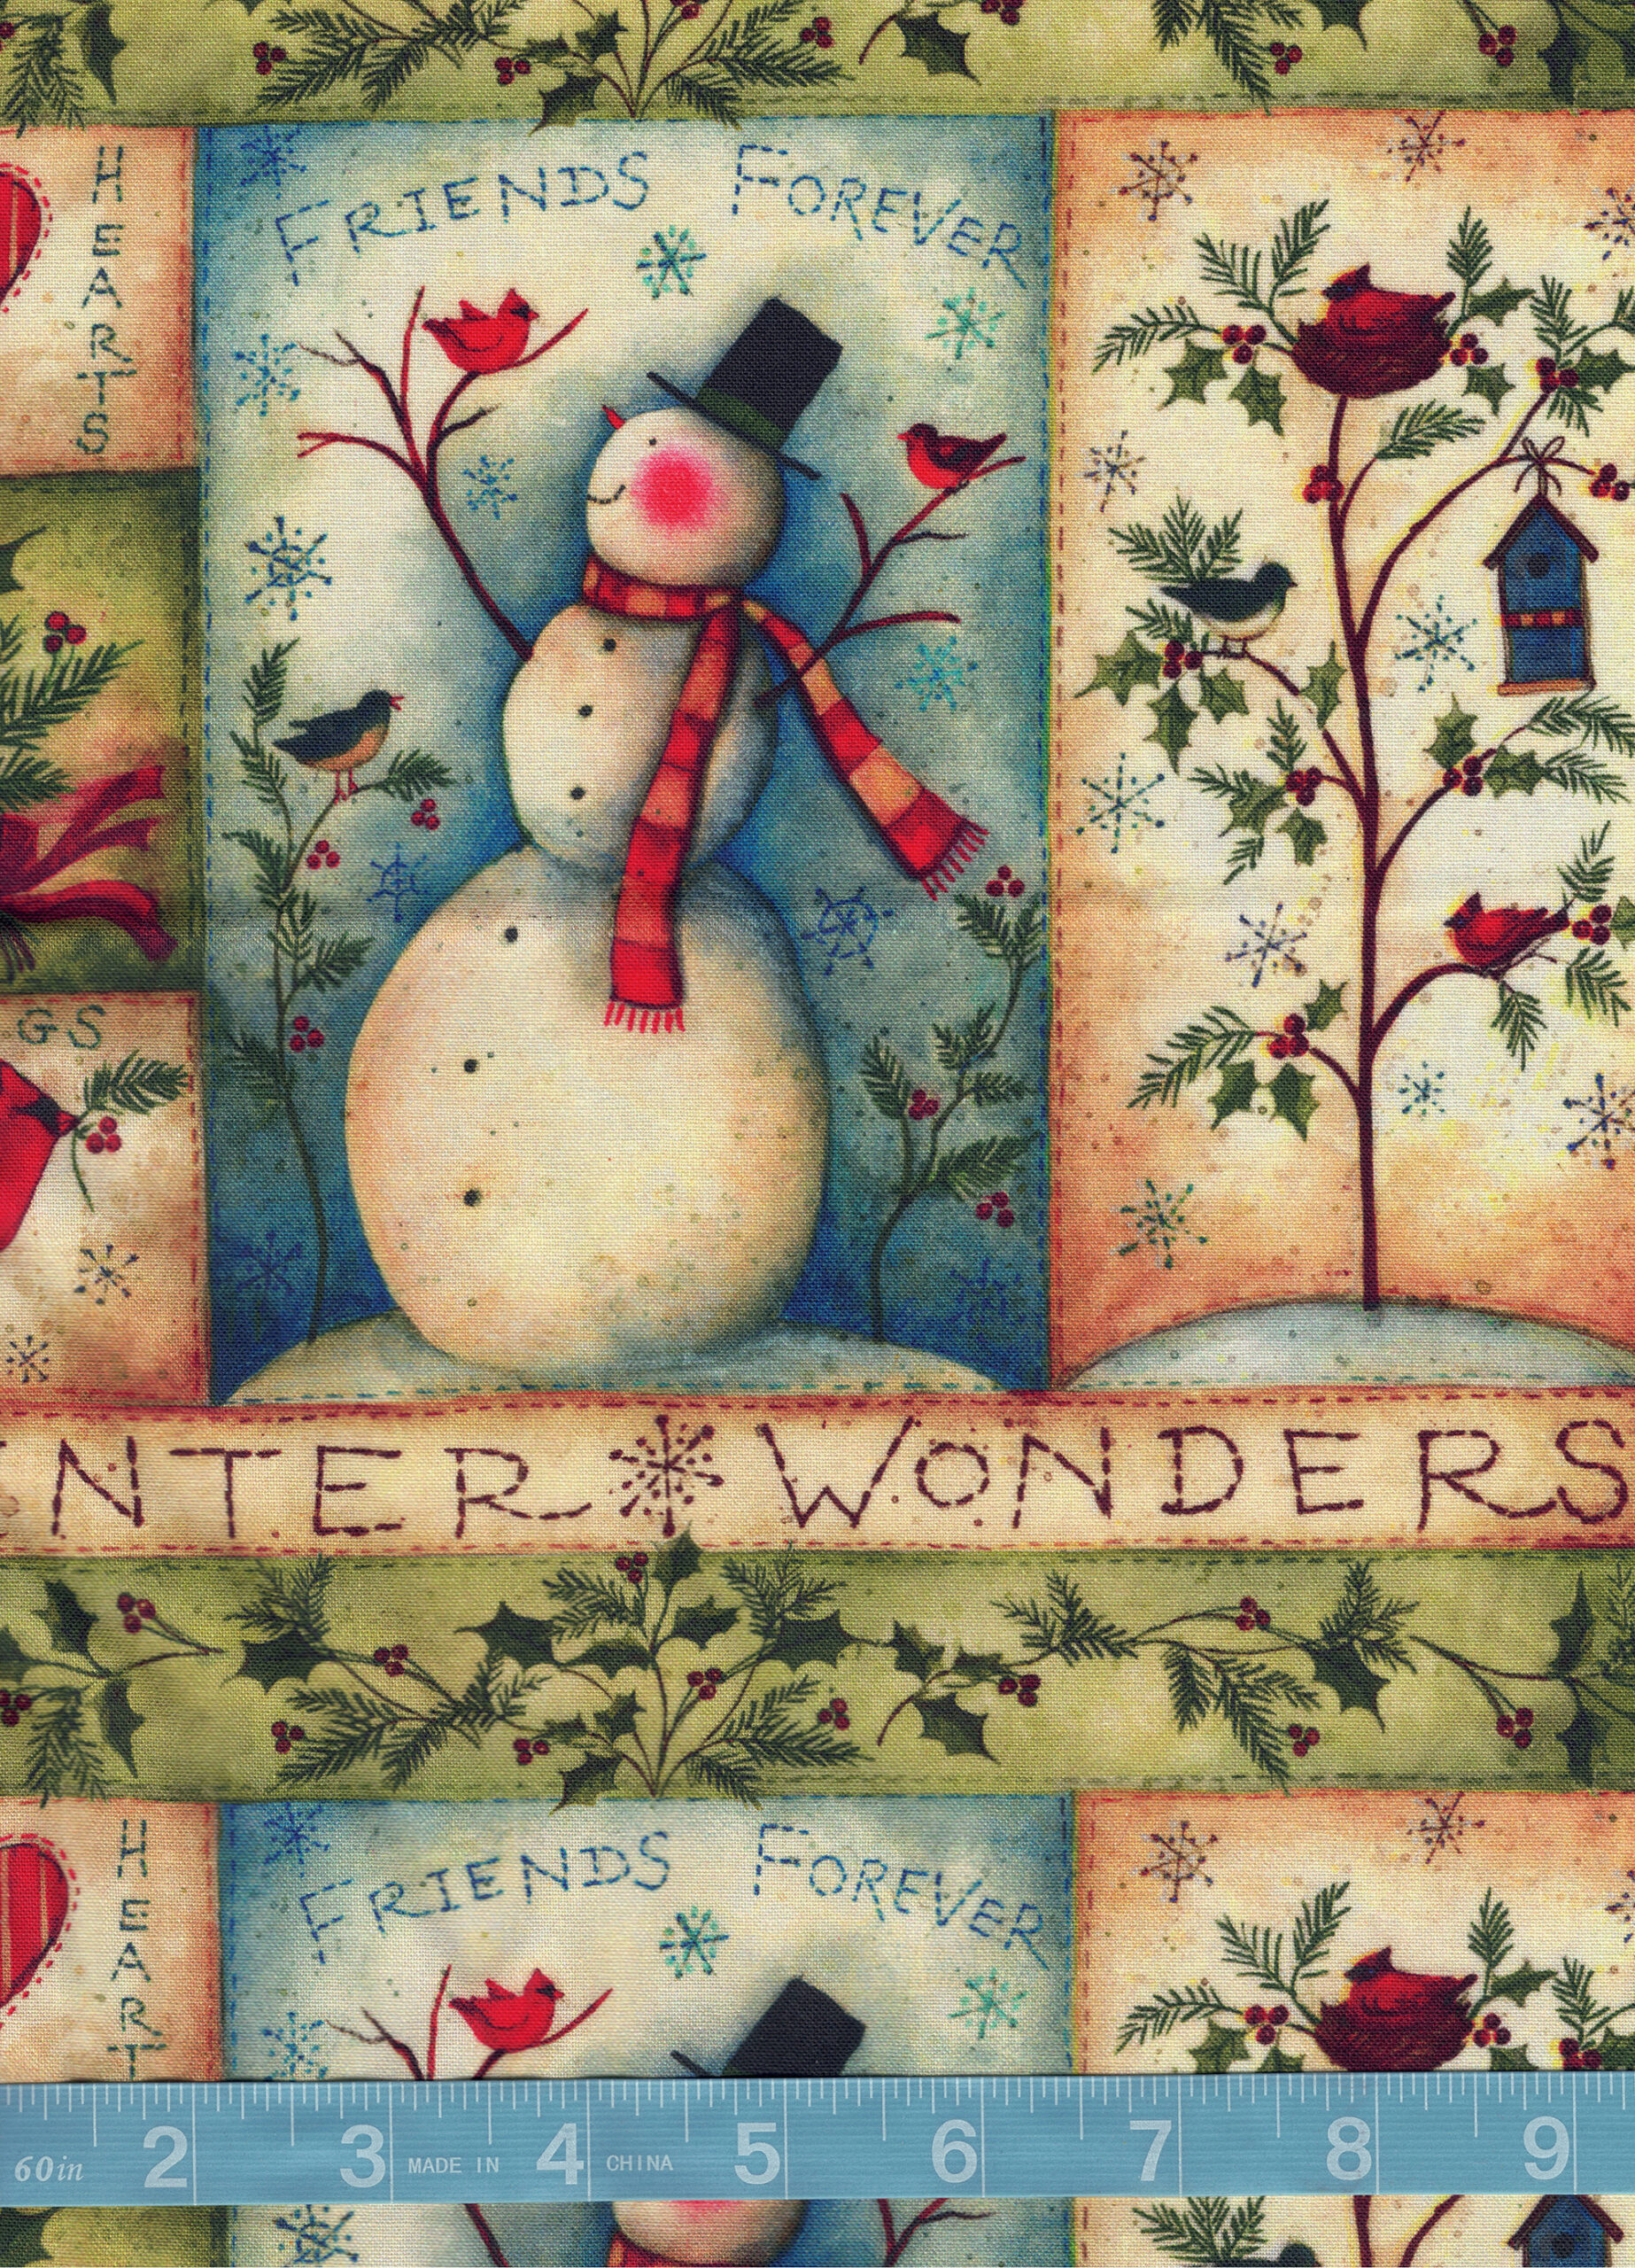 Snowman Stitches by Susan Winget Christmas Quilt Cotton Fabric By The Yard